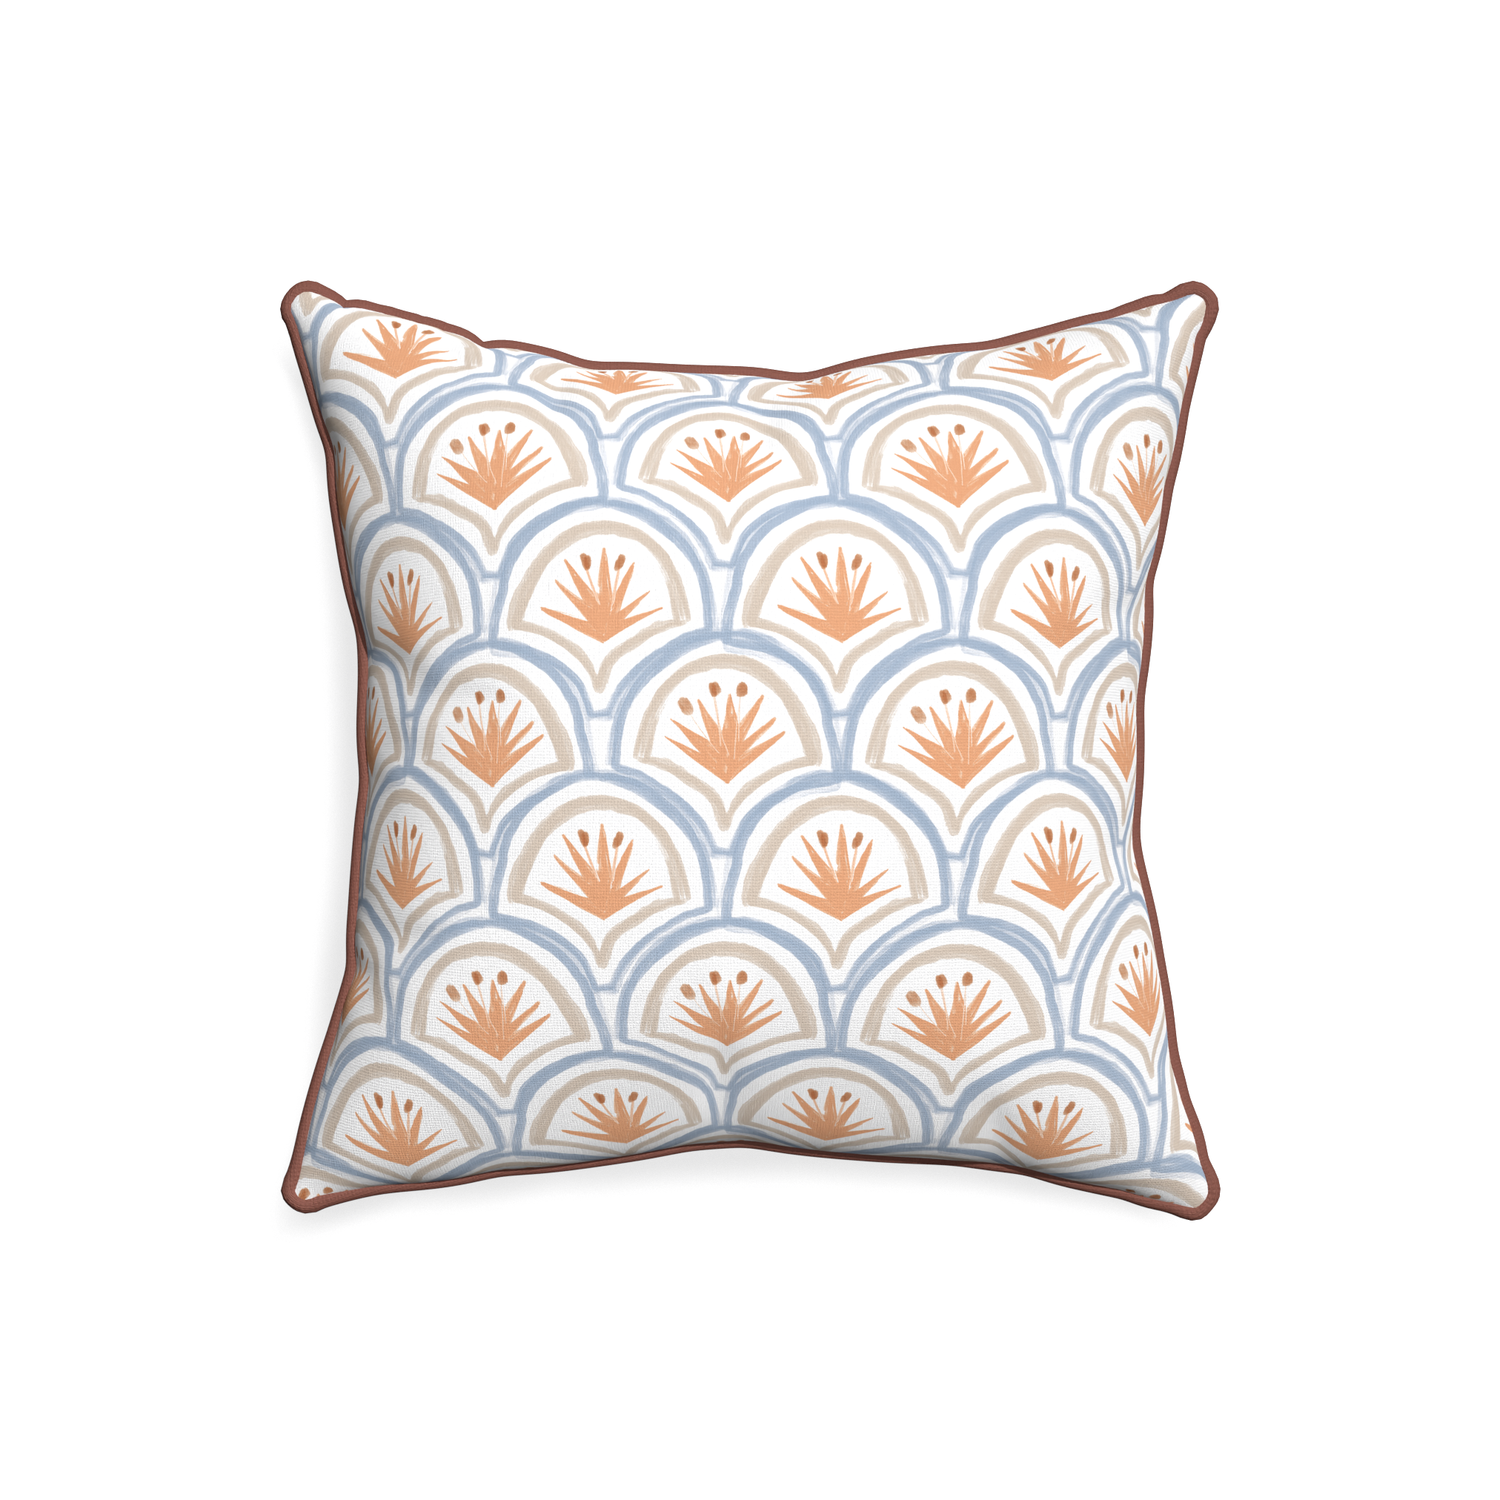 20-square thatcher apricot custom pillow with w piping on white background